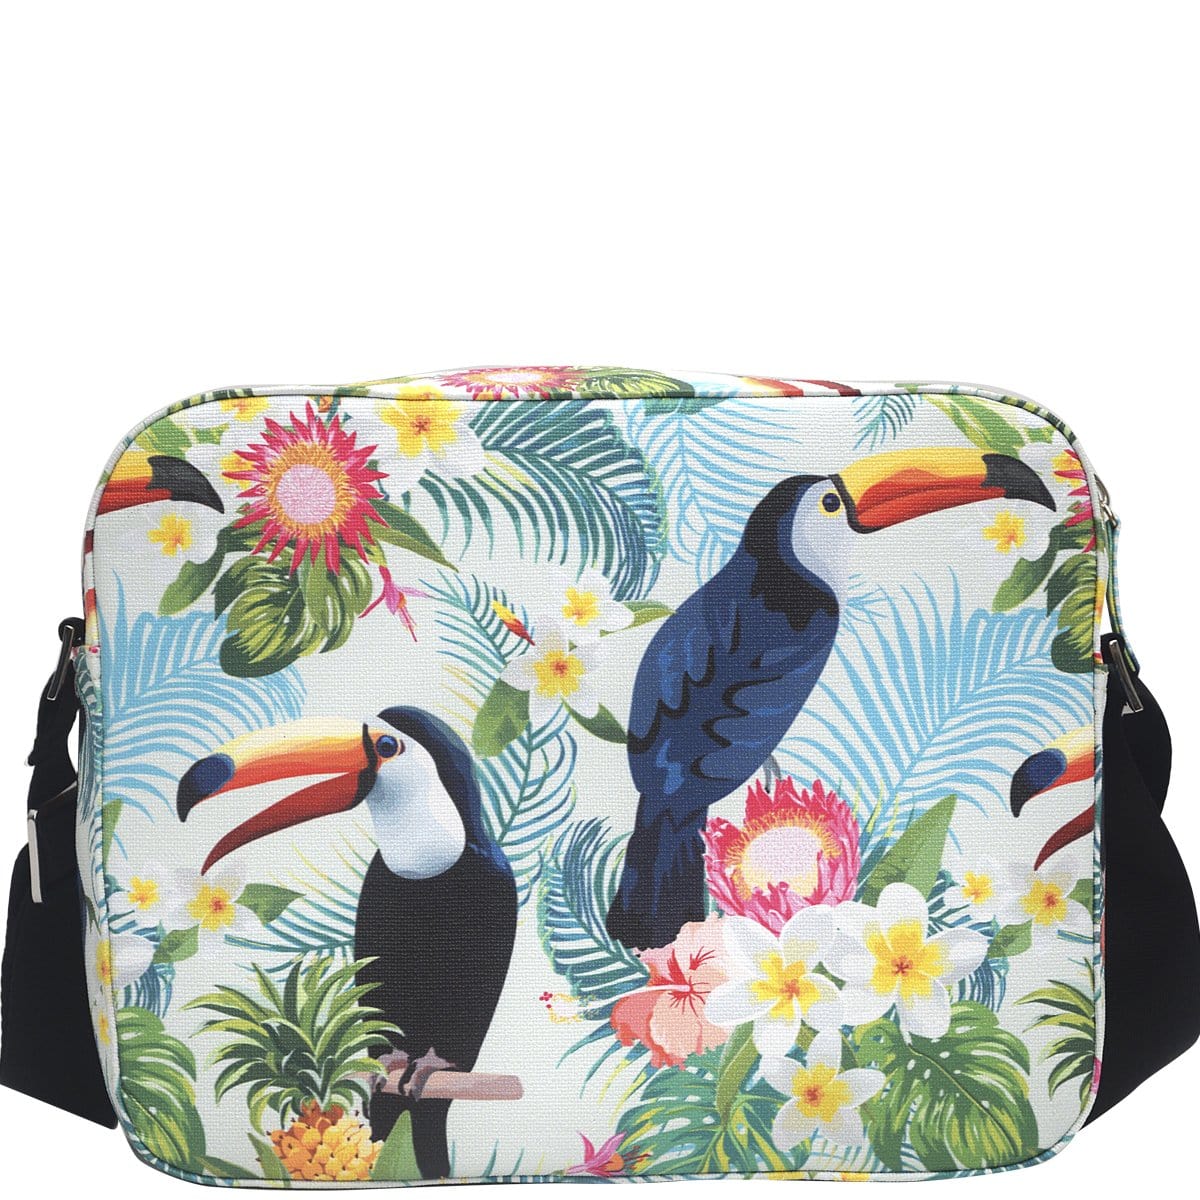 Hold-All - Toucan Print - SALE 50% off